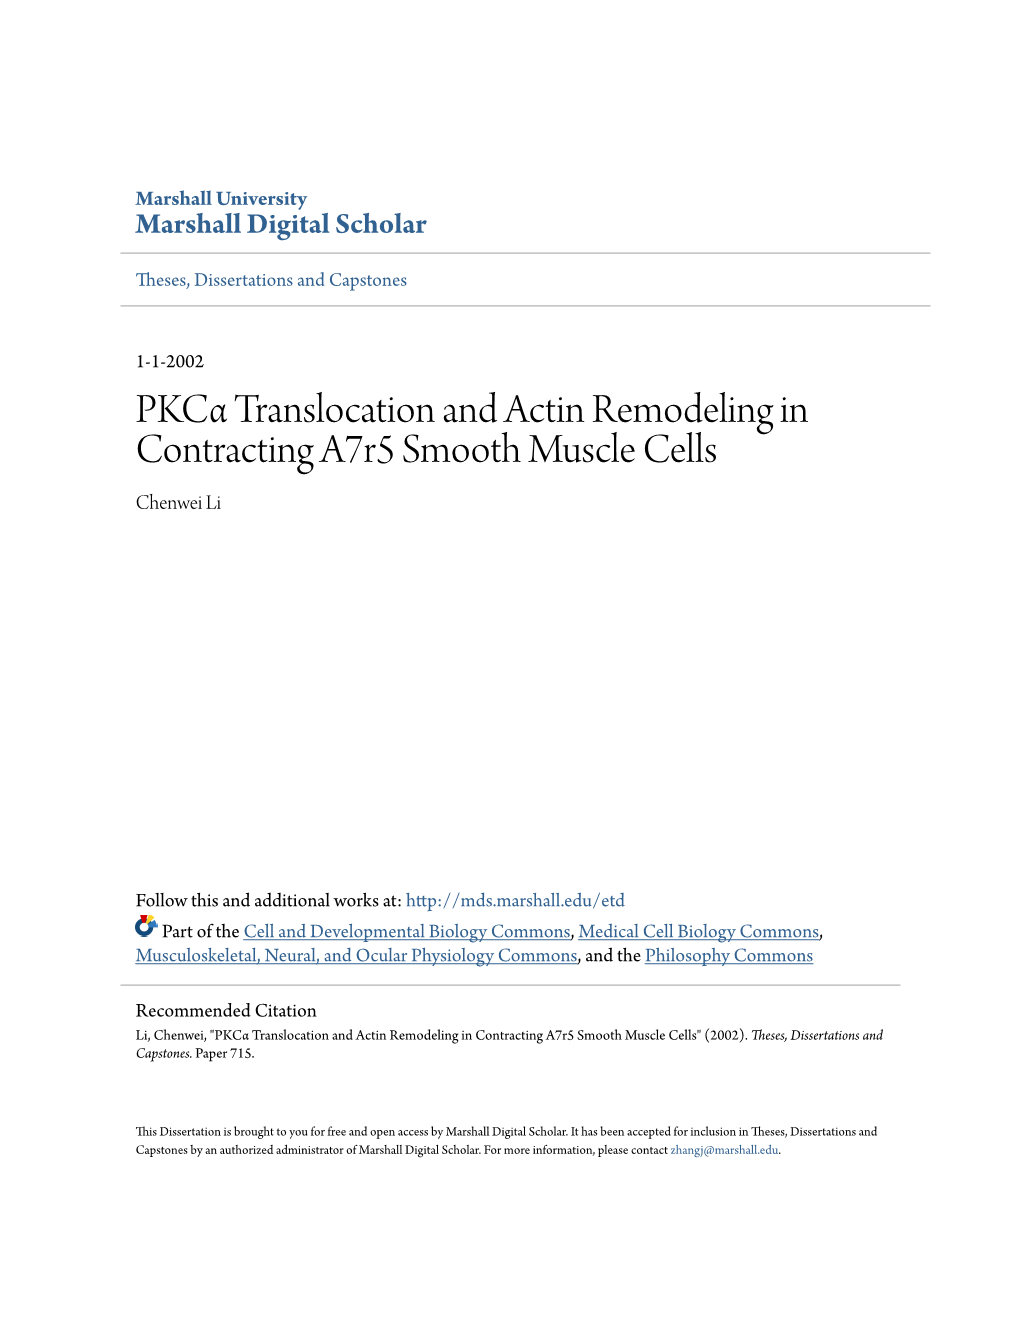 PKCÎ± Translocation and Actin Remodeling in Contracting A7r5